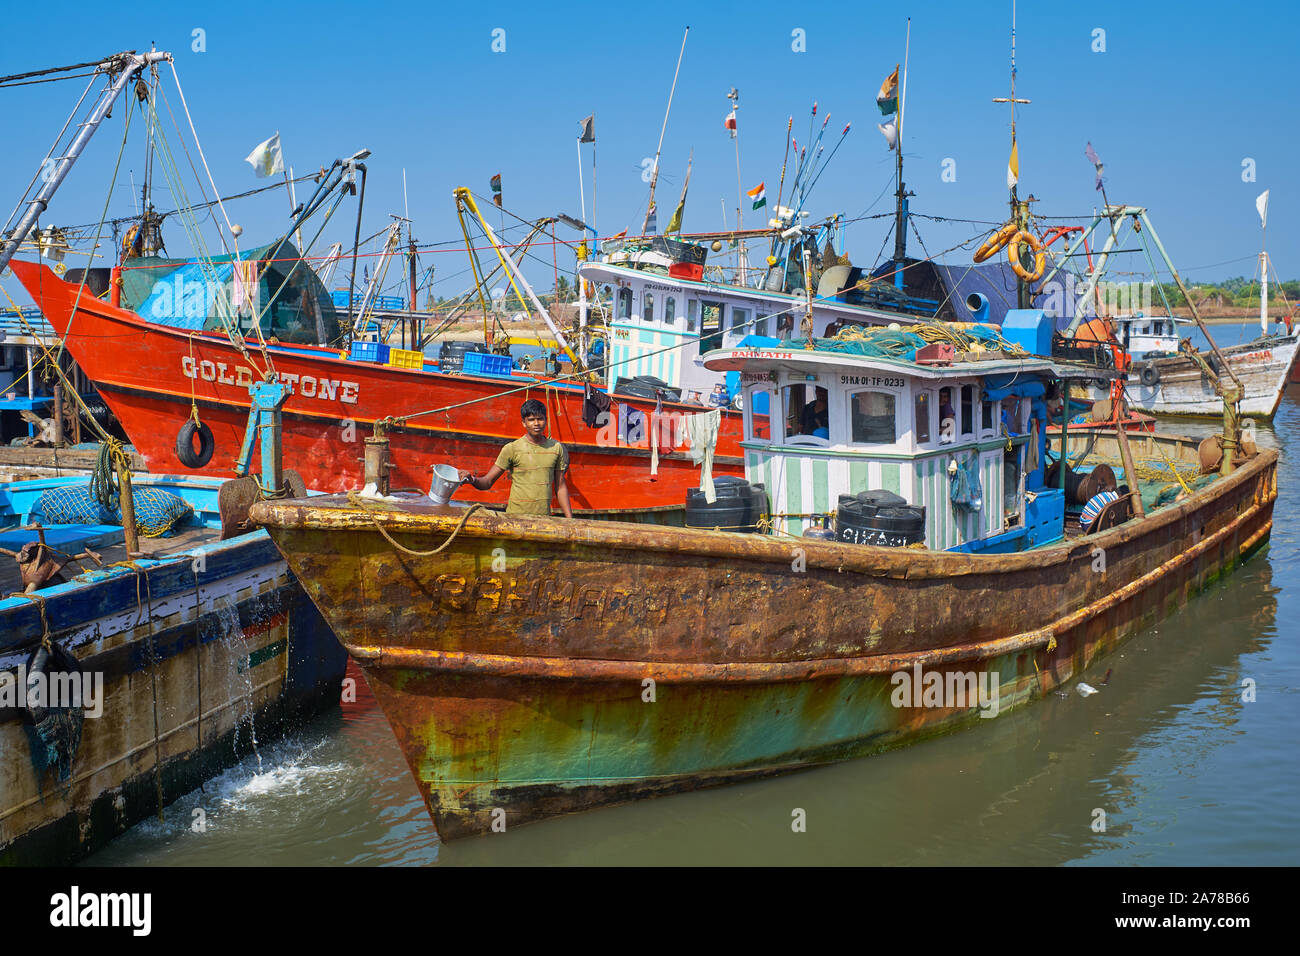 Small Colorful Fishing Boats In The The Old Harbor In Mangalore